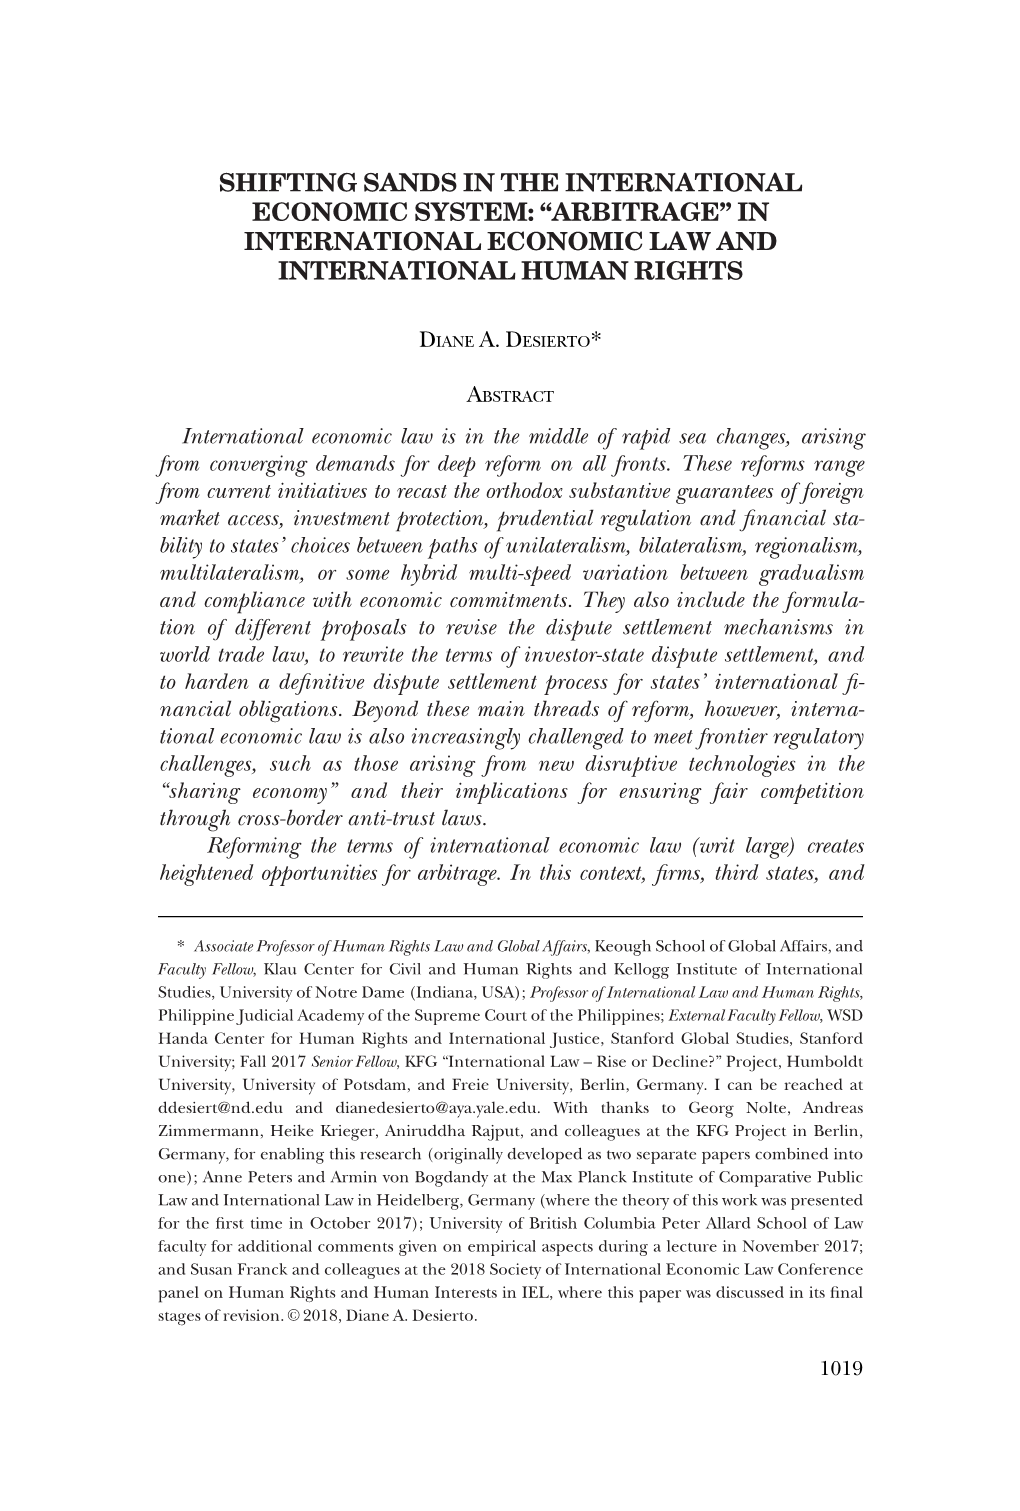 Arbitrage in International Economic Law and Human Rights